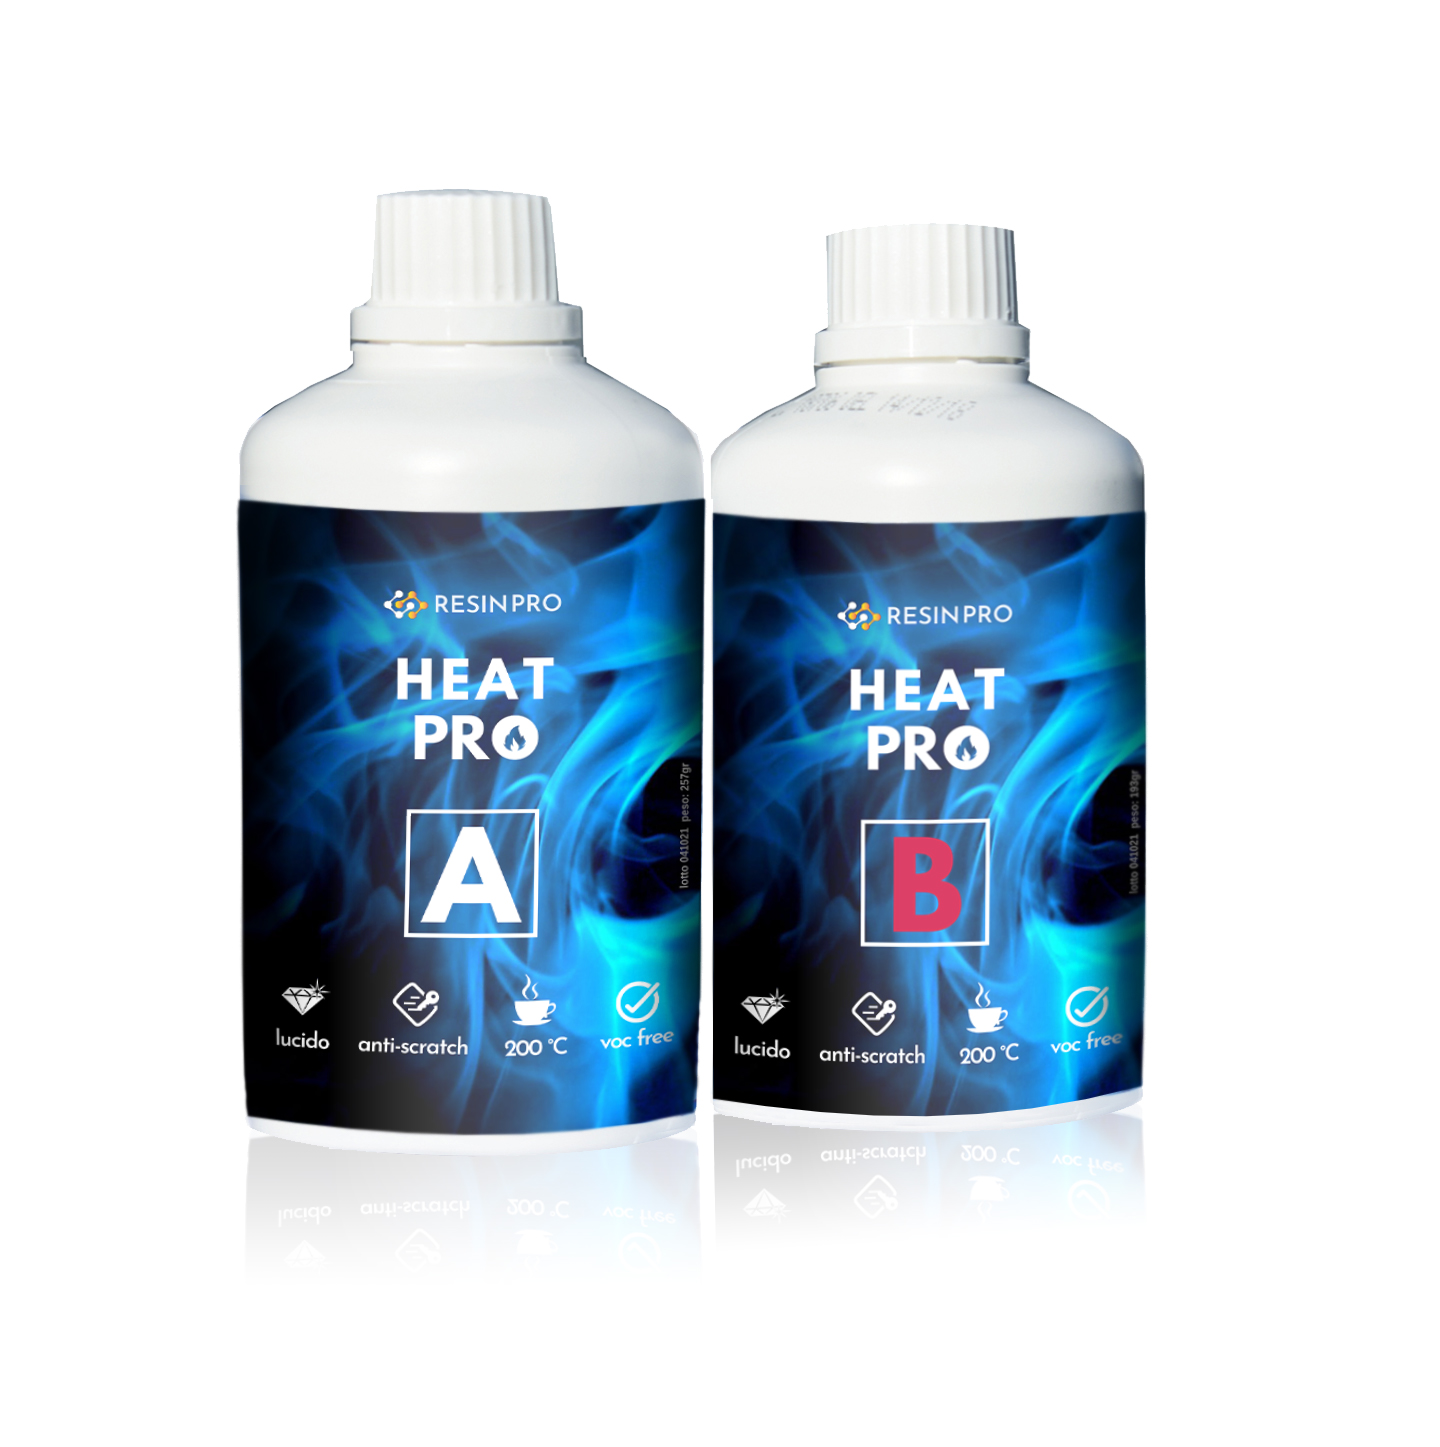 ® Heat PRO Scratch Resistant Protective Coating, Flexible Glossy Protective  Resin for Resin Creations, Scratch Resistant and High Temperature